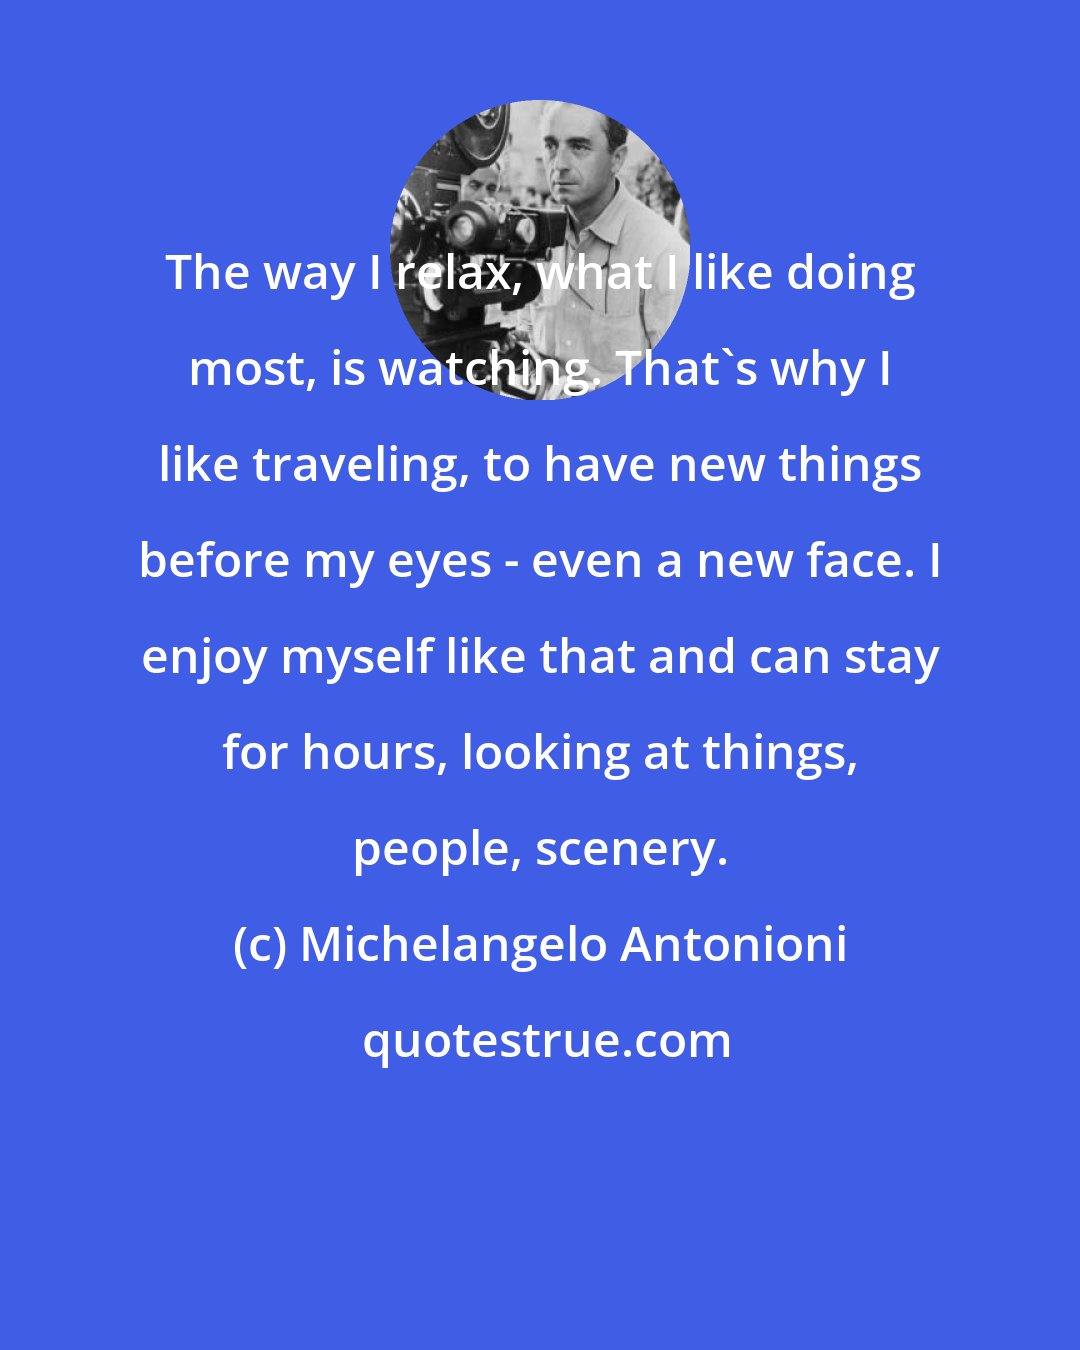 Michelangelo Antonioni: The way I relax, what I like doing most, is watching. That's why I like traveling, to have new things before my eyes - even a new face. I enjoy myself like that and can stay for hours, looking at things, people, scenery.